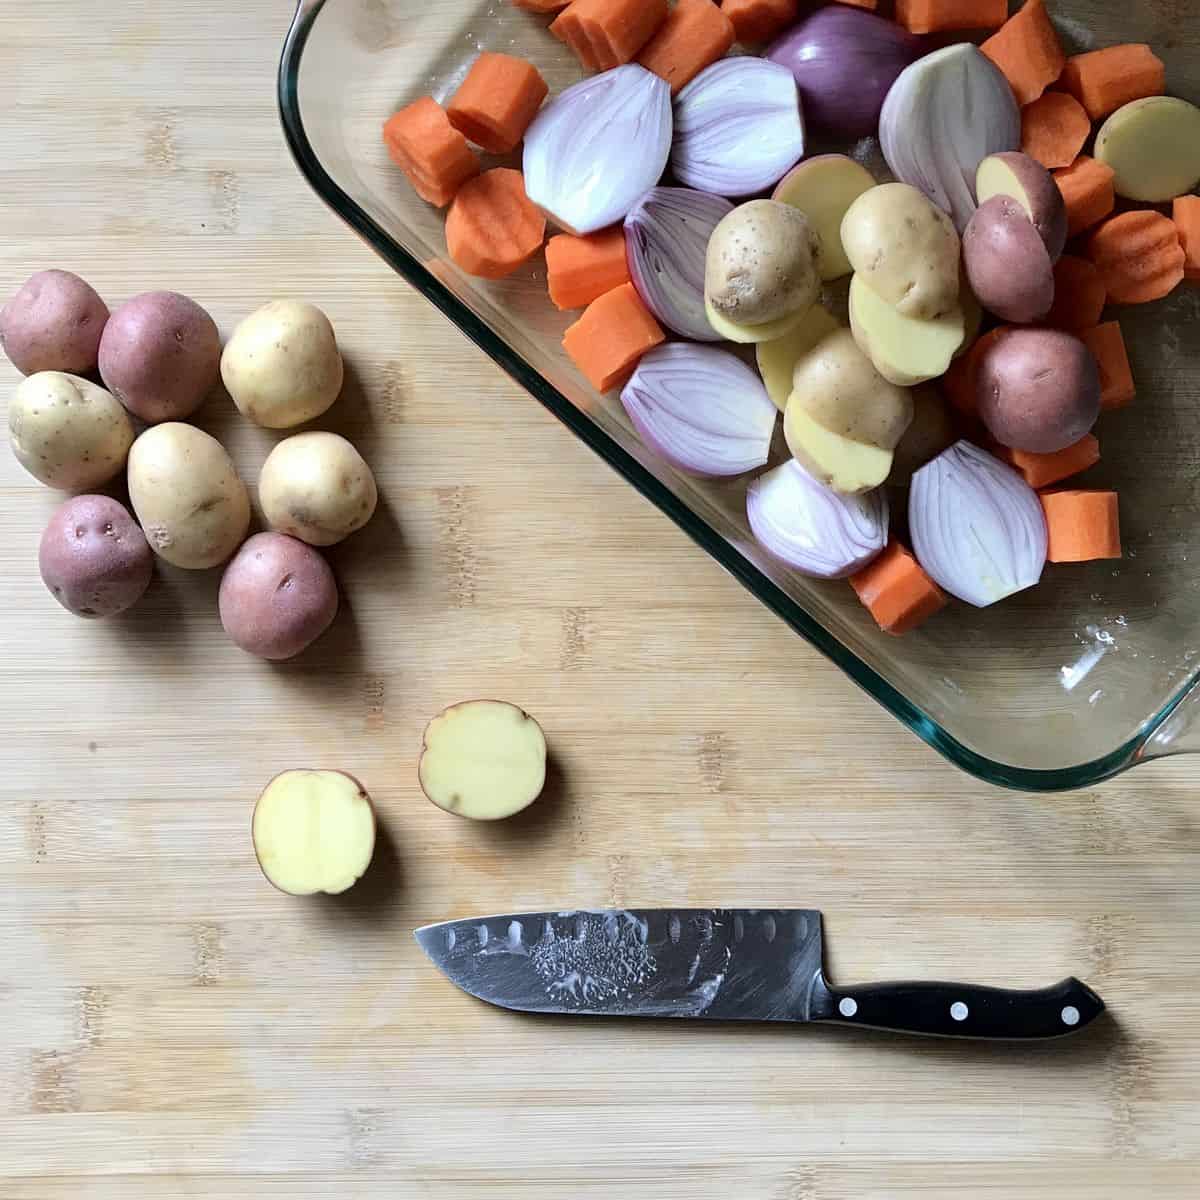 Halved baby potatoes next to a baking dish of sliced carrots and shallots.